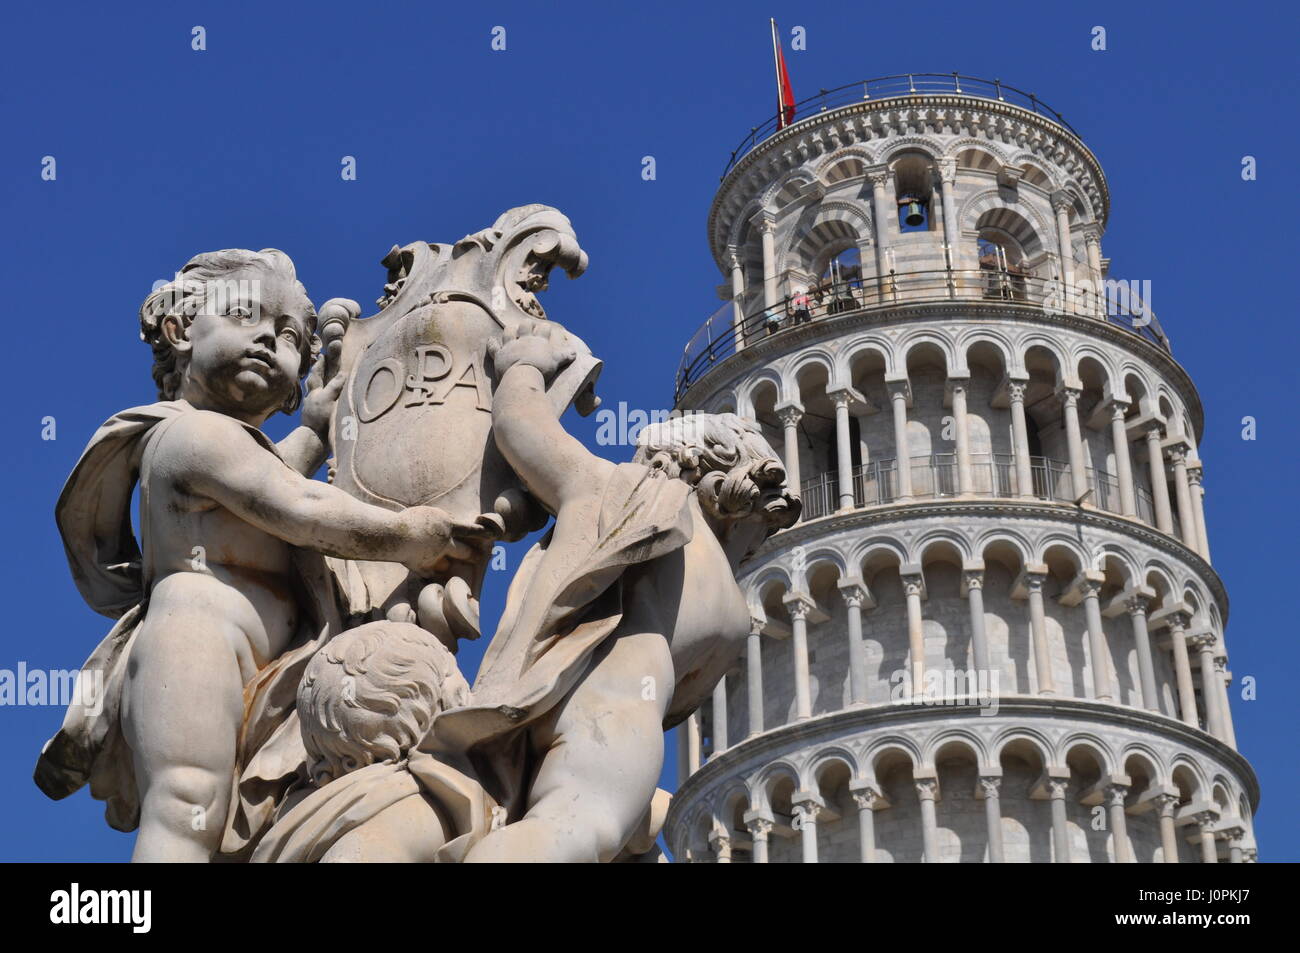 The Leaning Tower of Pisa or simply the Tower of Pisa is the campanile, or freestanding bell tower, of the cathedral of the Italian city of Pisa, know Stock Photo